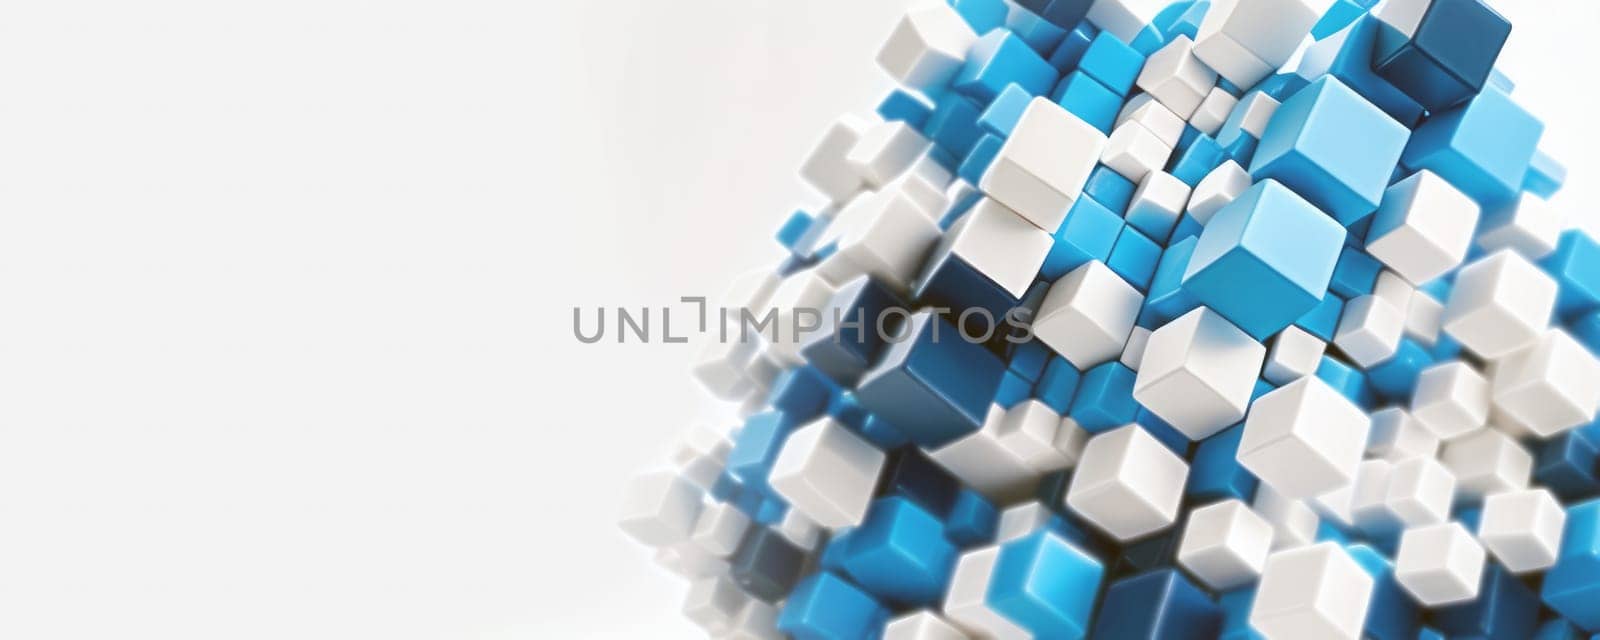 This is a 3D rendering of numerous cubes clustered together. The cubes are in various shades of blue and white, creating a visually appealing contrast. The arrangement of the cubes gives a sense of depth and dimension, with some cubes appearing closer and others further away. The background is white, which enhances the visibility and color contrast of the blue and white cubes. There is a shadow beneath the cluster of cubes, adding to the 3D effect. Generative AI